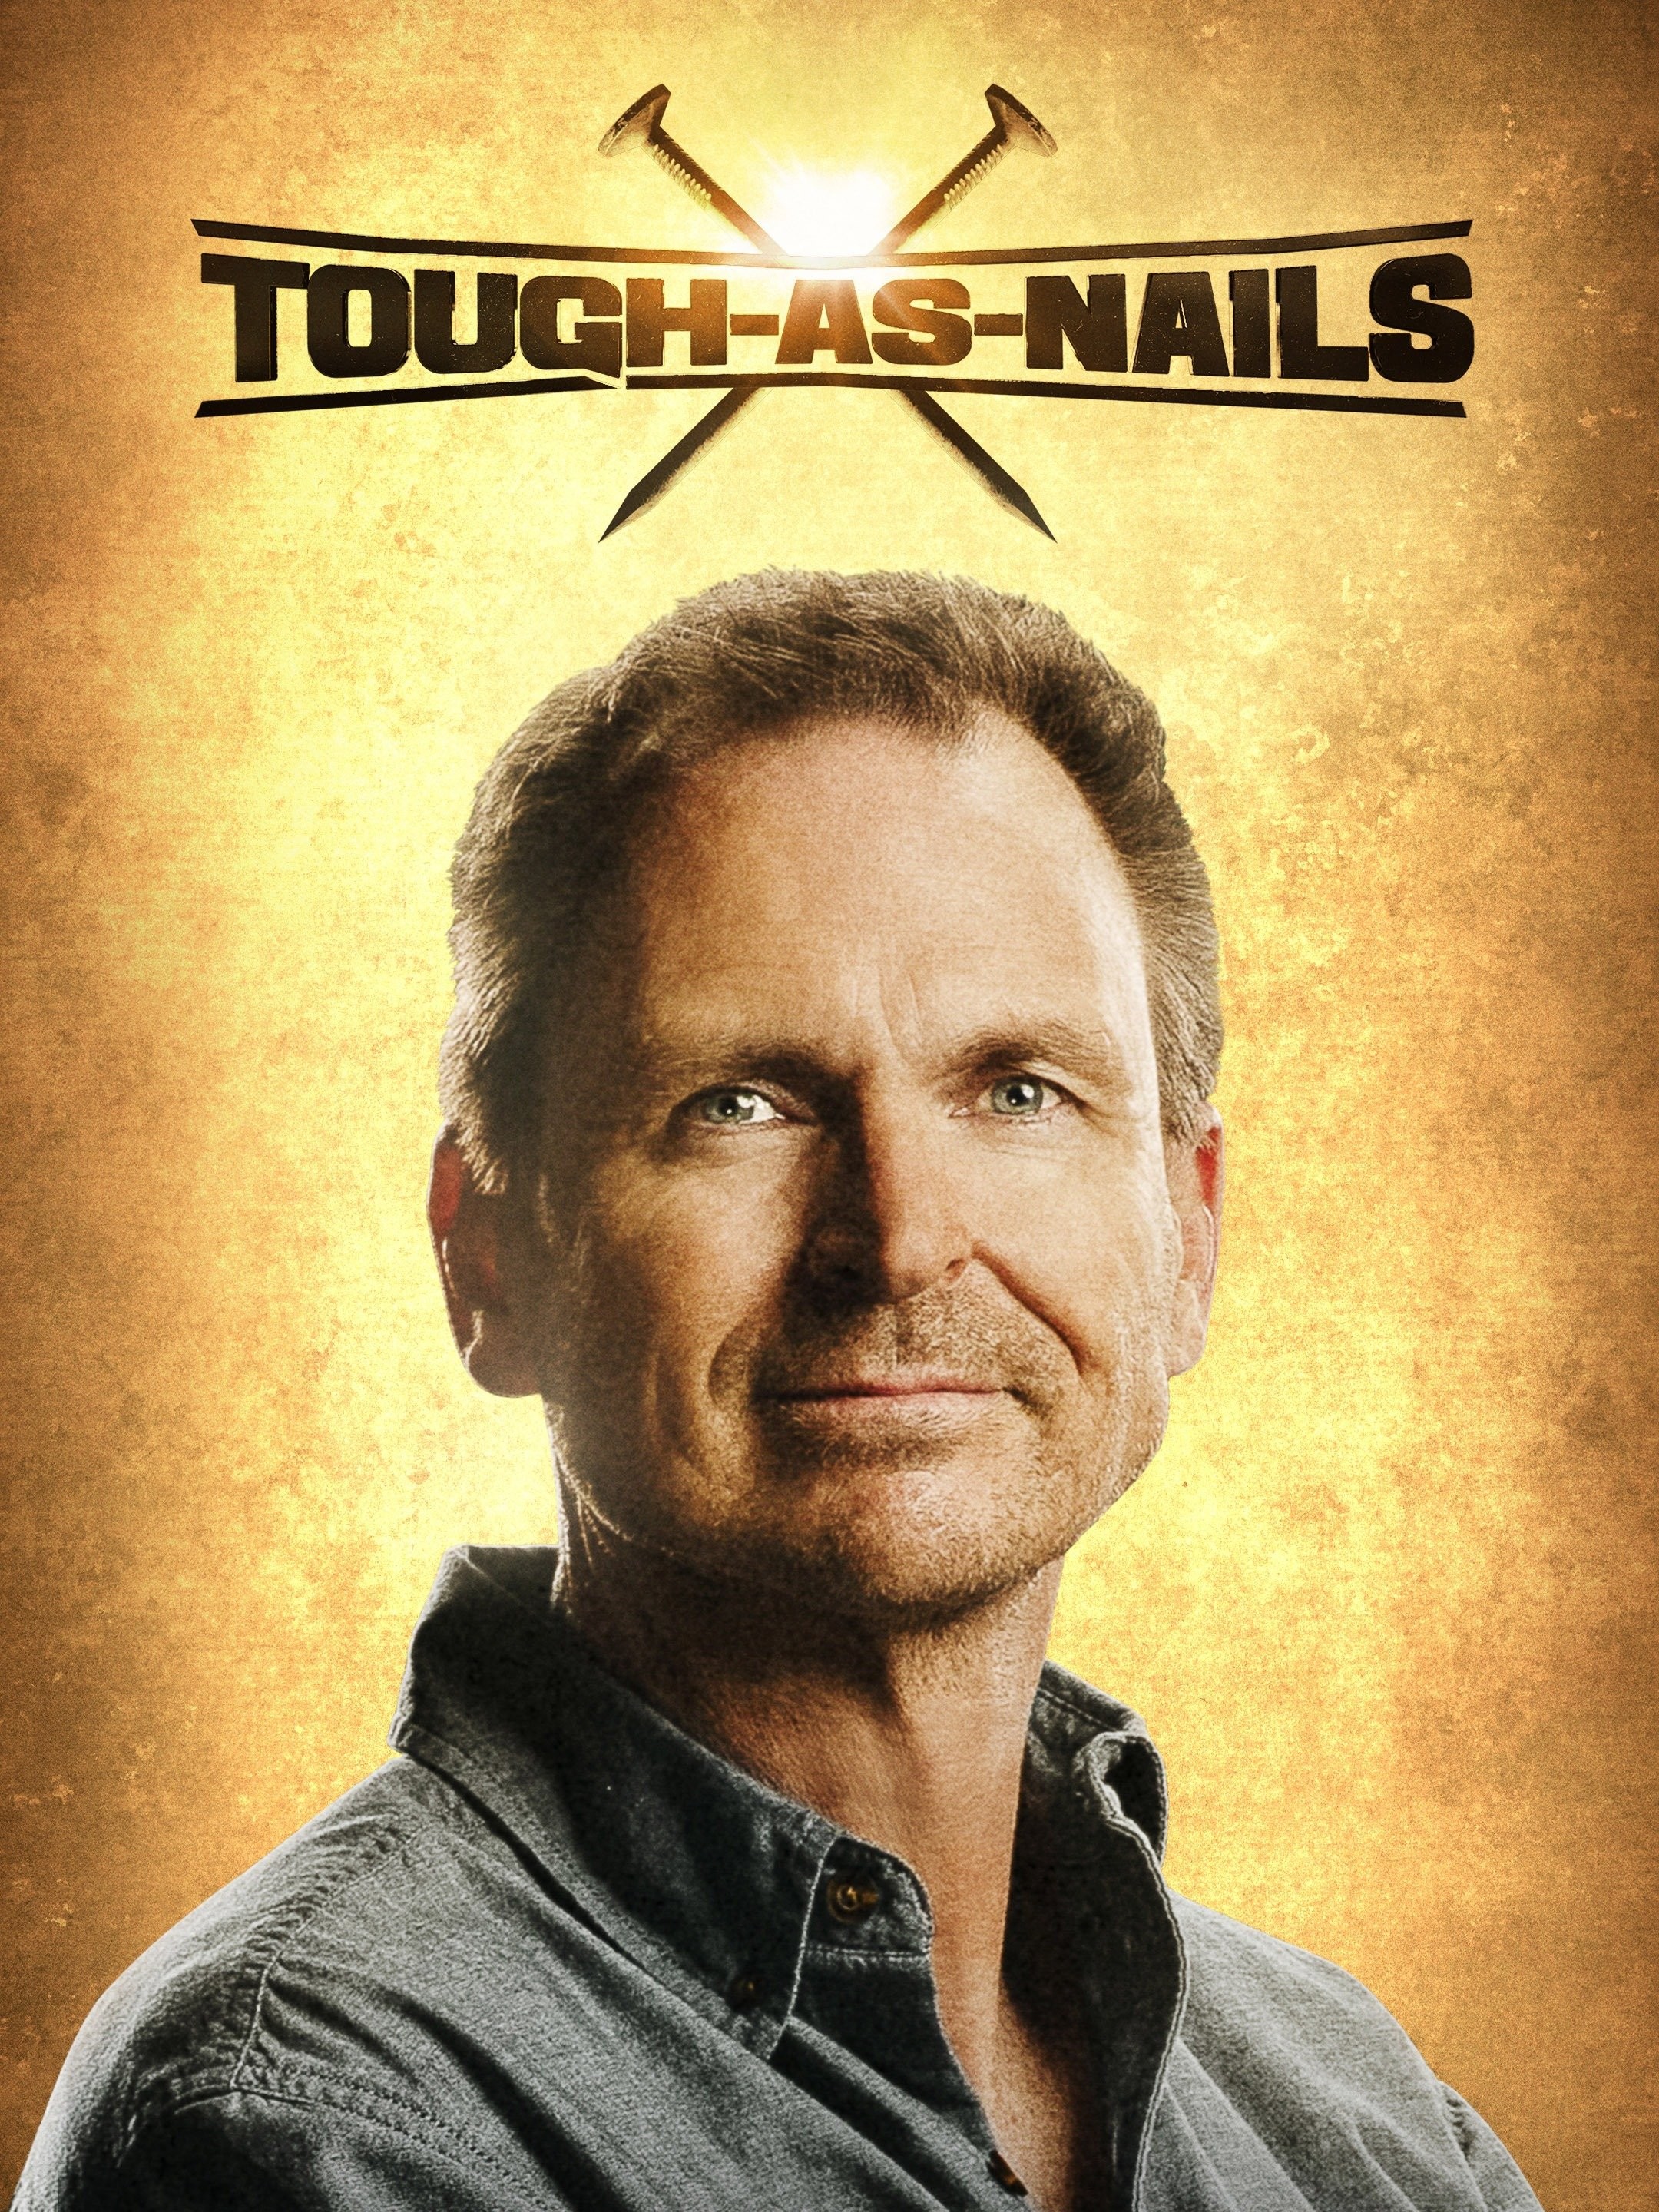 Paramount Press Express | MEET THE 12 NEW CREW MEMBERS COMPETING ON “TOUGH  AS NAILS”!